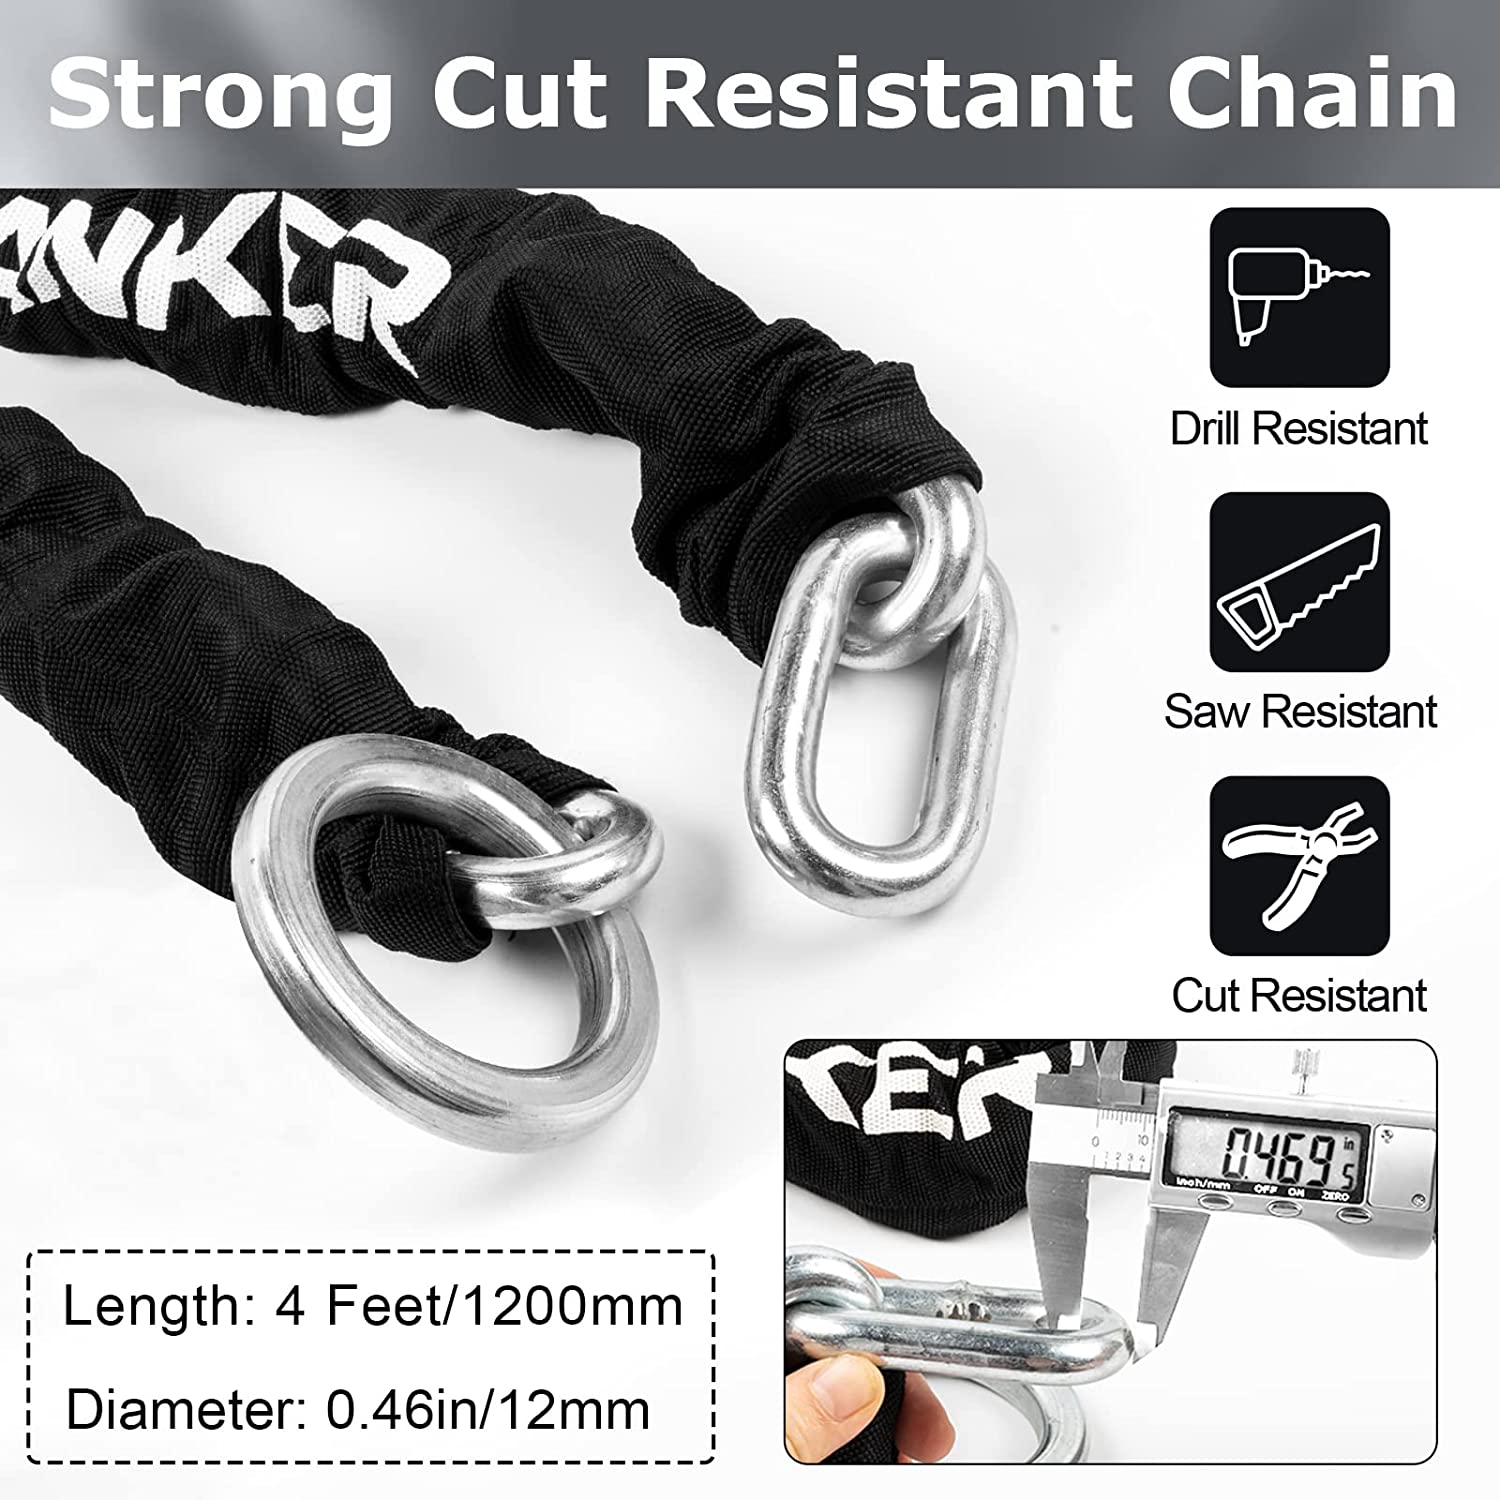 Titanker Bike Chain Lock, Security Anti-Theft Bike Lock Chain Bicycle Chain  Lock Bike Locks for Bike, Motorcycle, Bicycle, Door, Gate, Fence, Grill